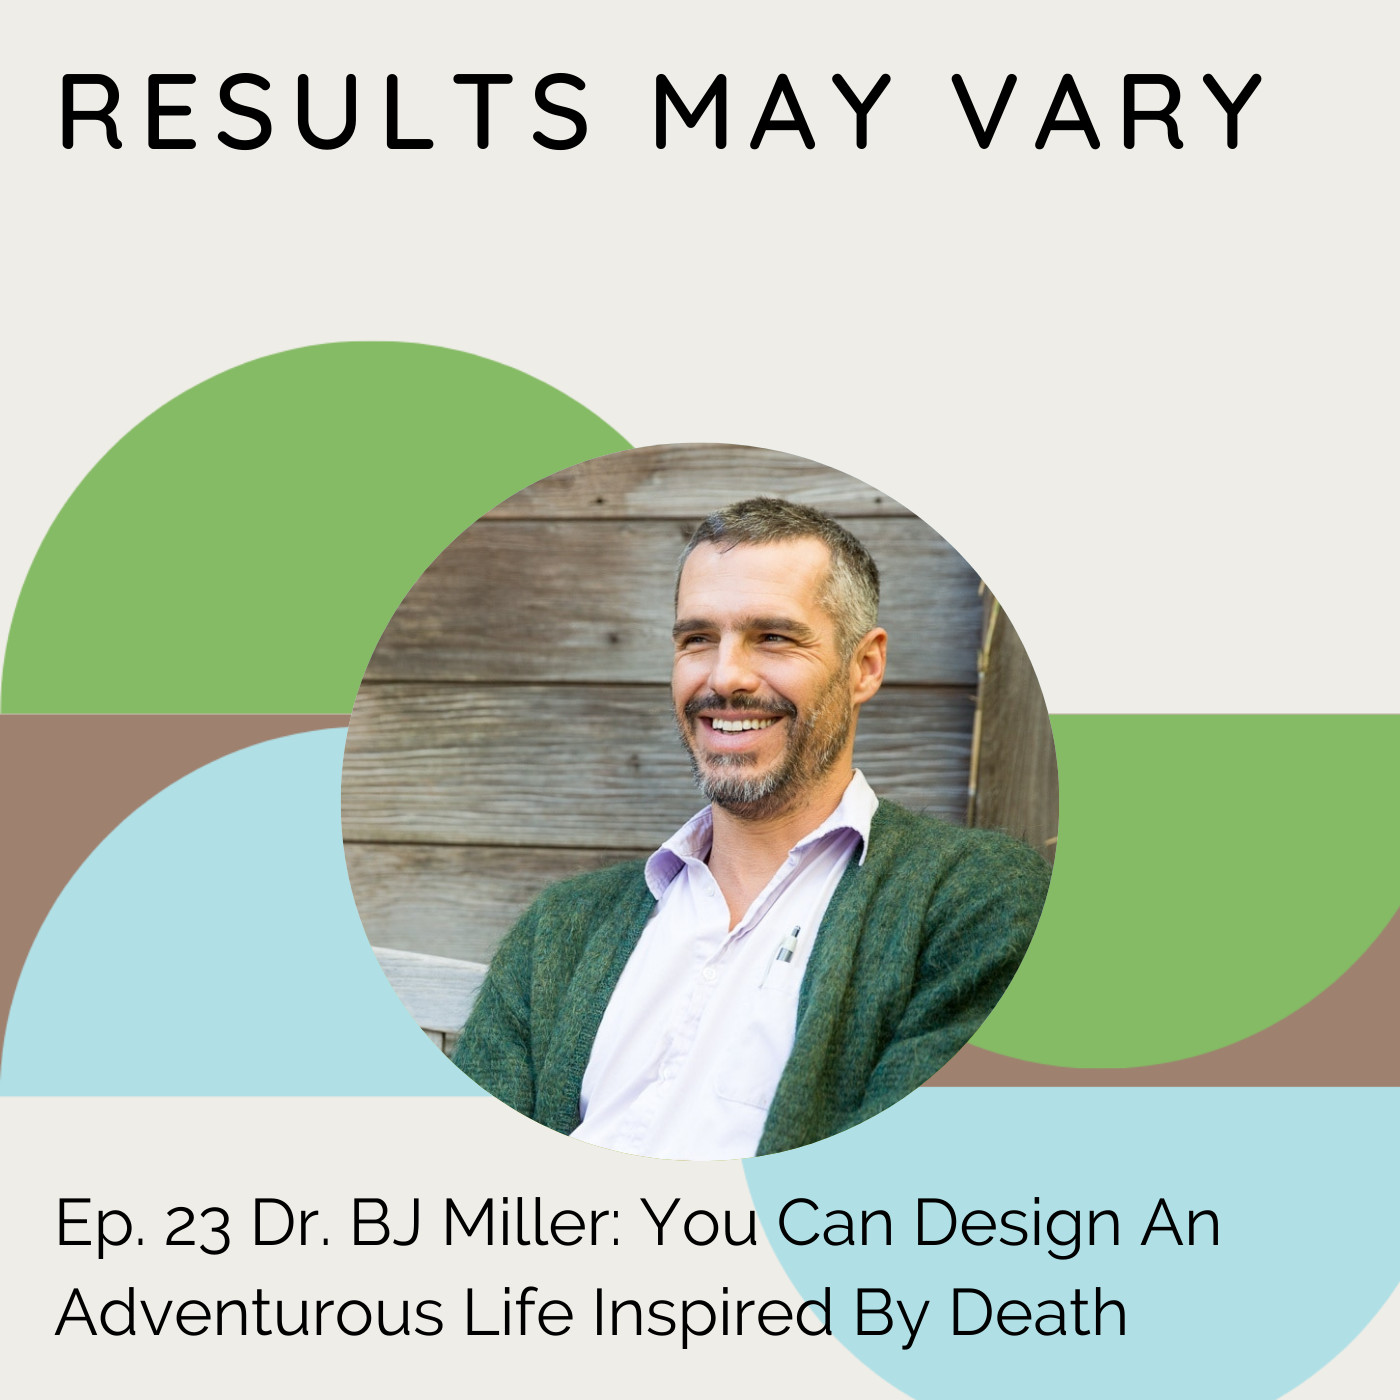 RMV 23 BJ Miller: You Can Design an Adventurous Life Inspired by Death